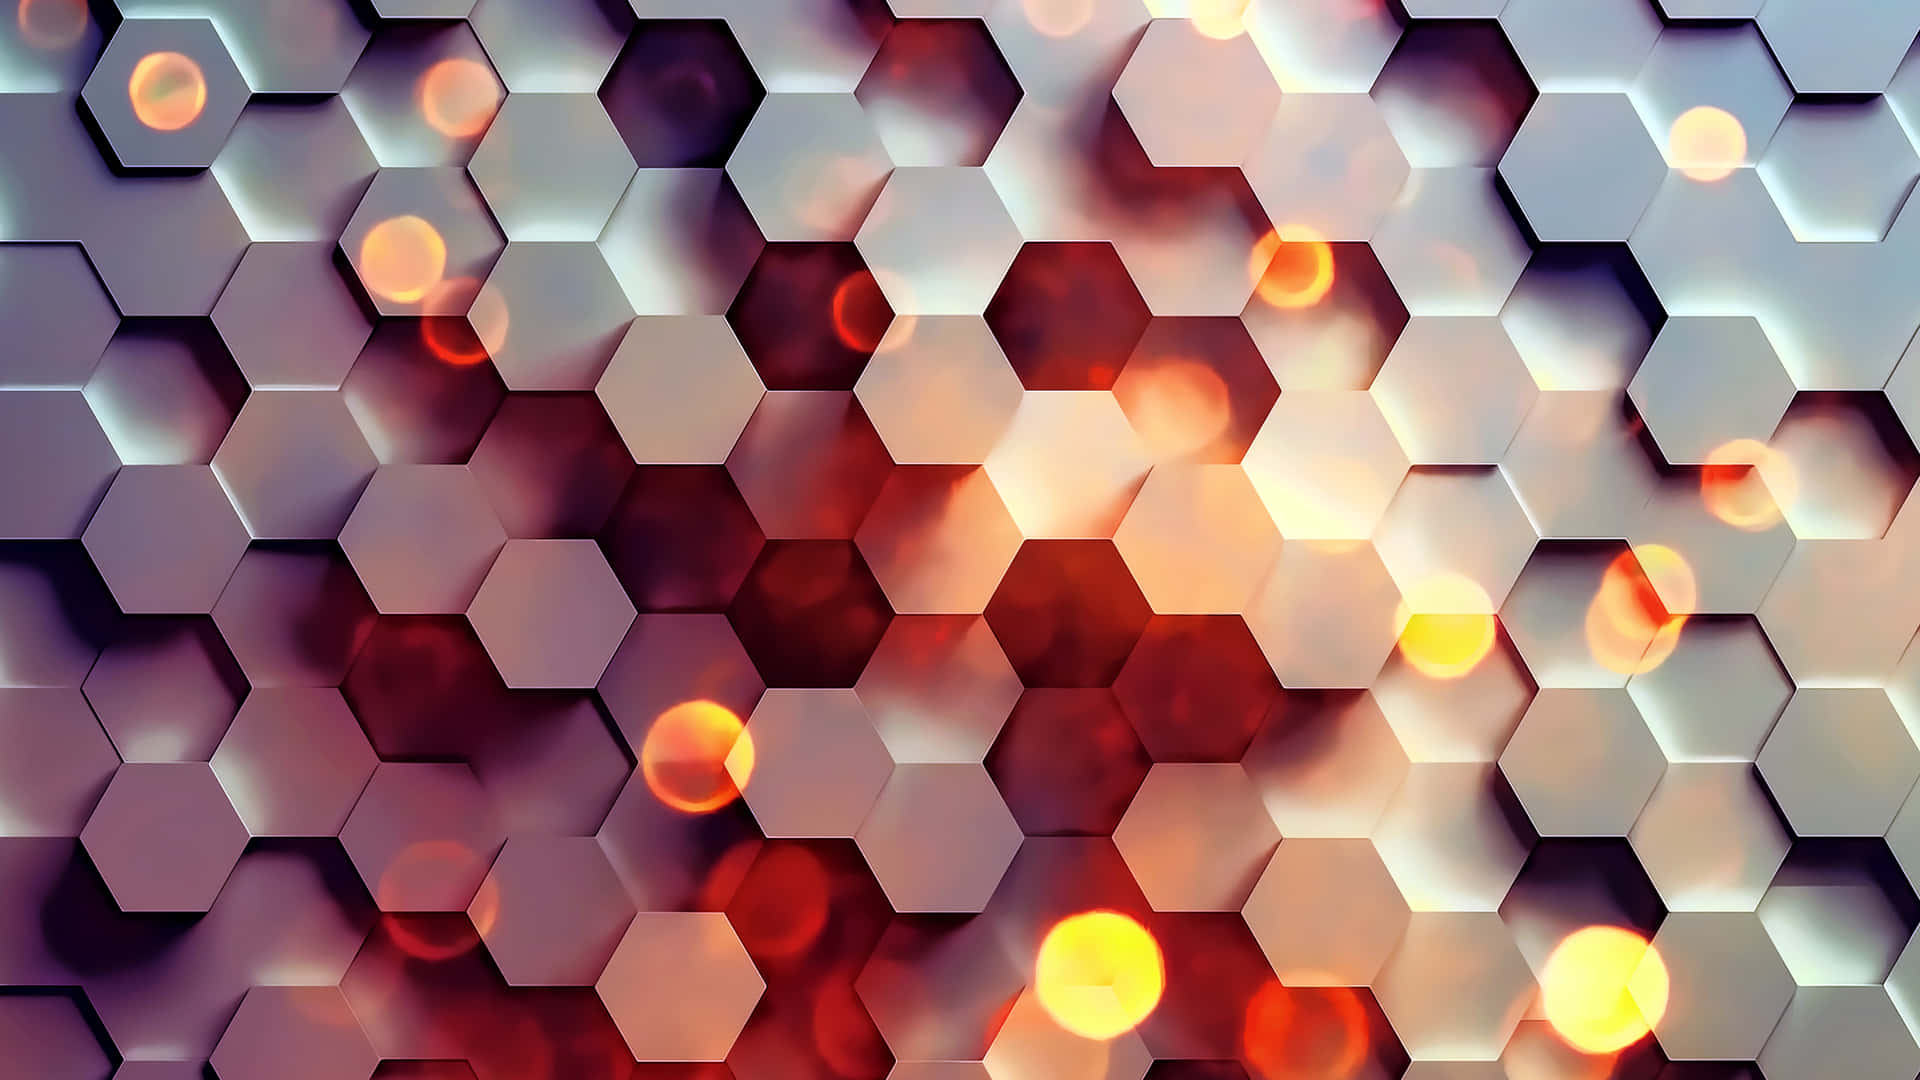 Explore abstract patterns with Hexagon 4k Wallpaper